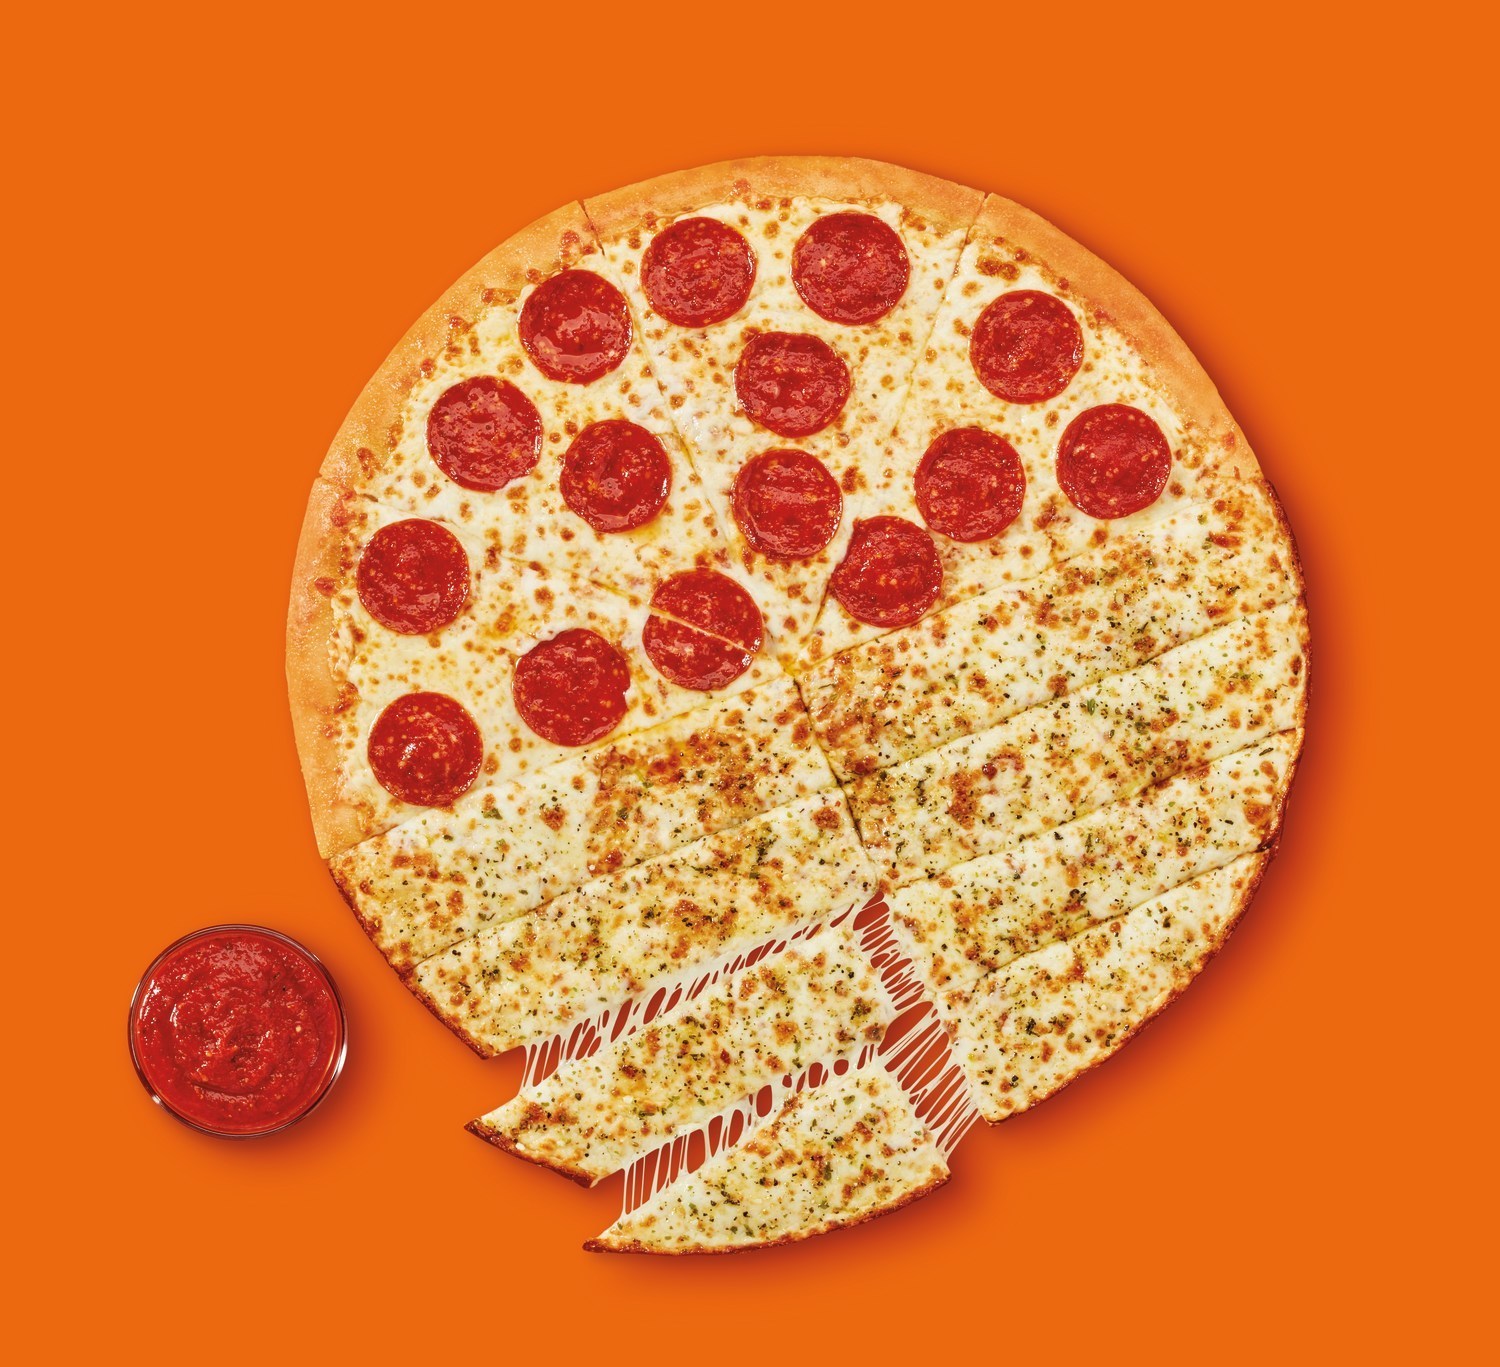 Little Caesars Unveils Slices N Stix An Unexpected Combination In One Amazing Pie